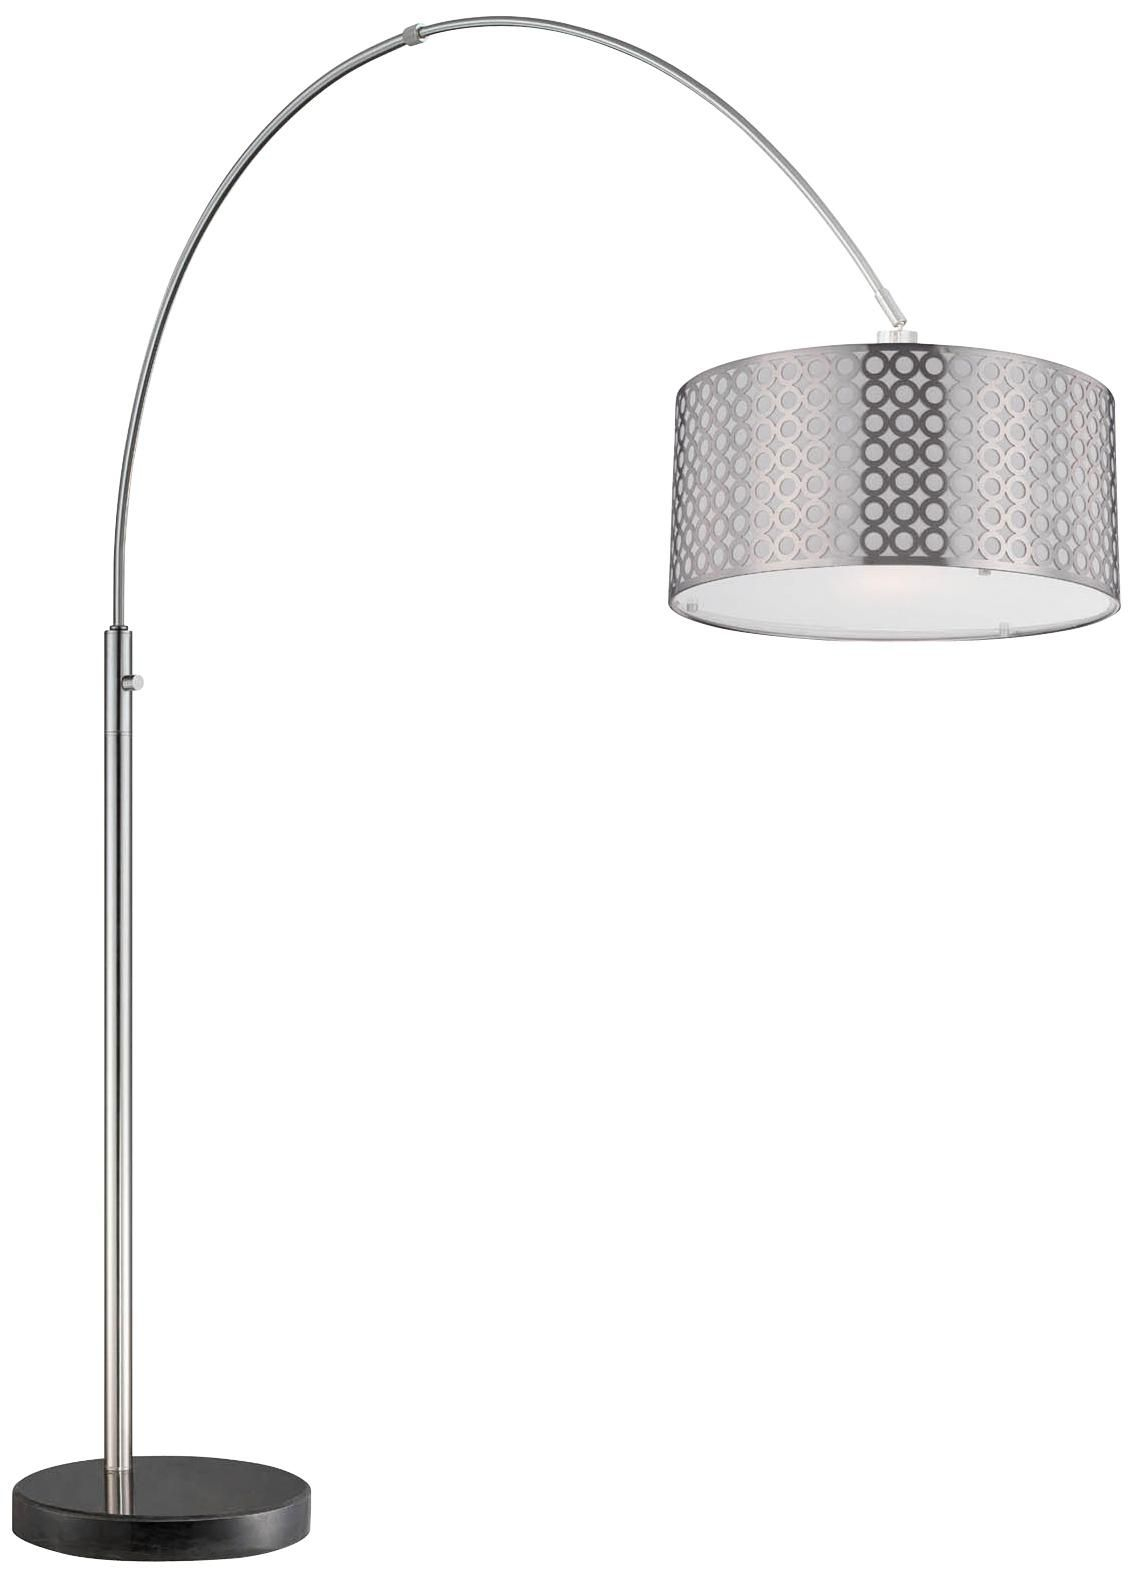 Lite Source Netto Arch Polished Steel Floor Lamp 1m within dimensions 1132 X 1578